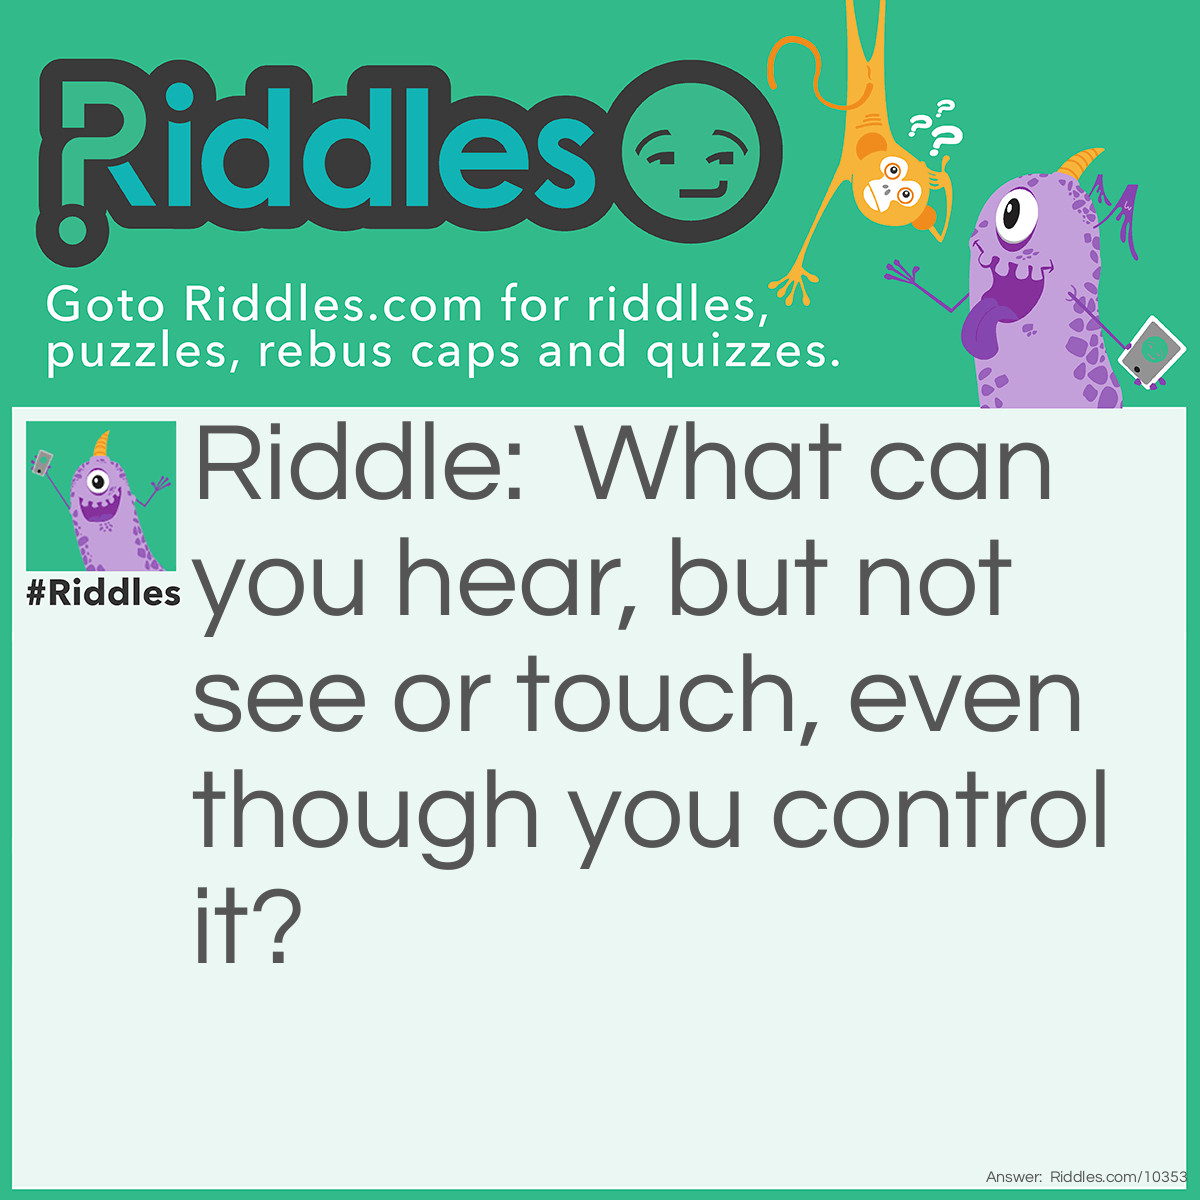 Riddle: What can you hear, but not see or touch, even though you control it? Answer: Your voice.